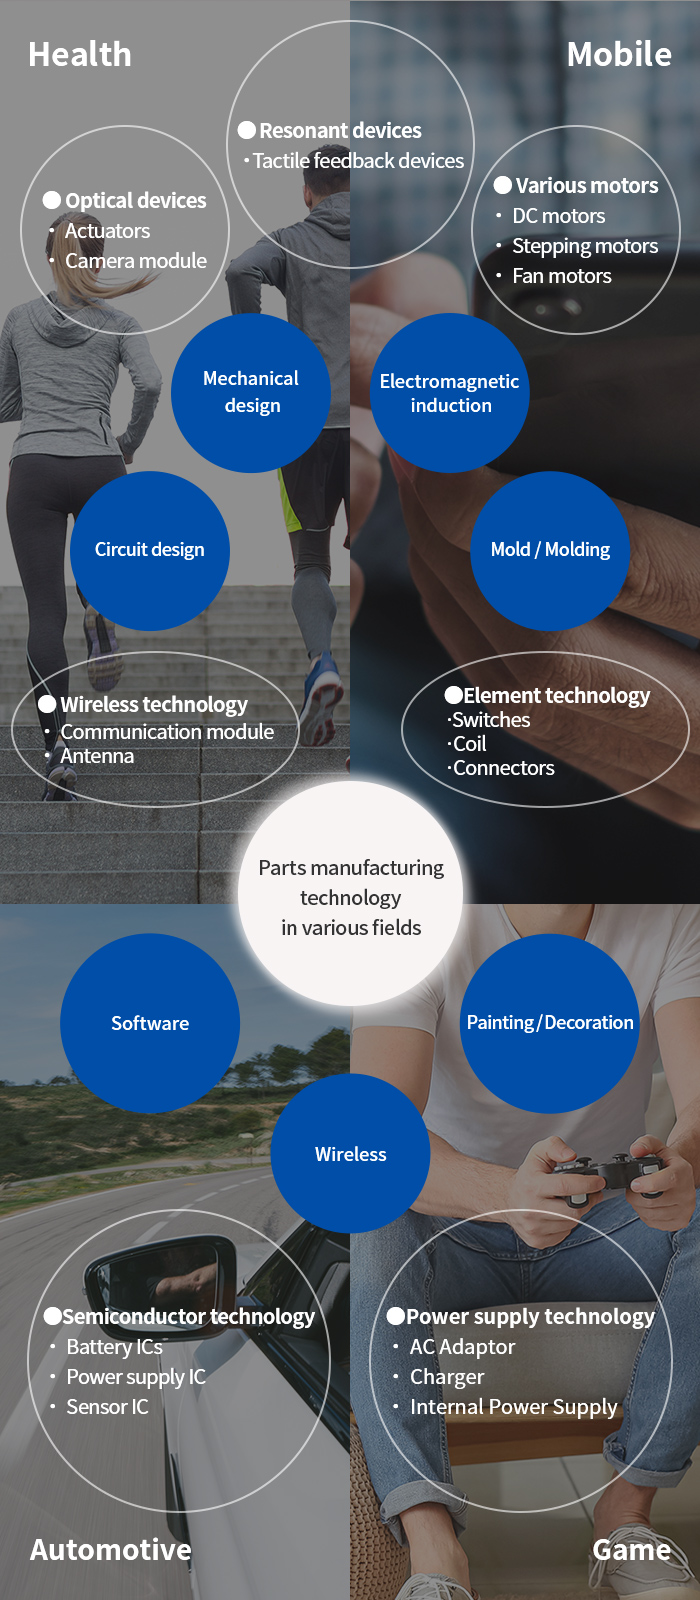 Parts manufacturing technology in various fields